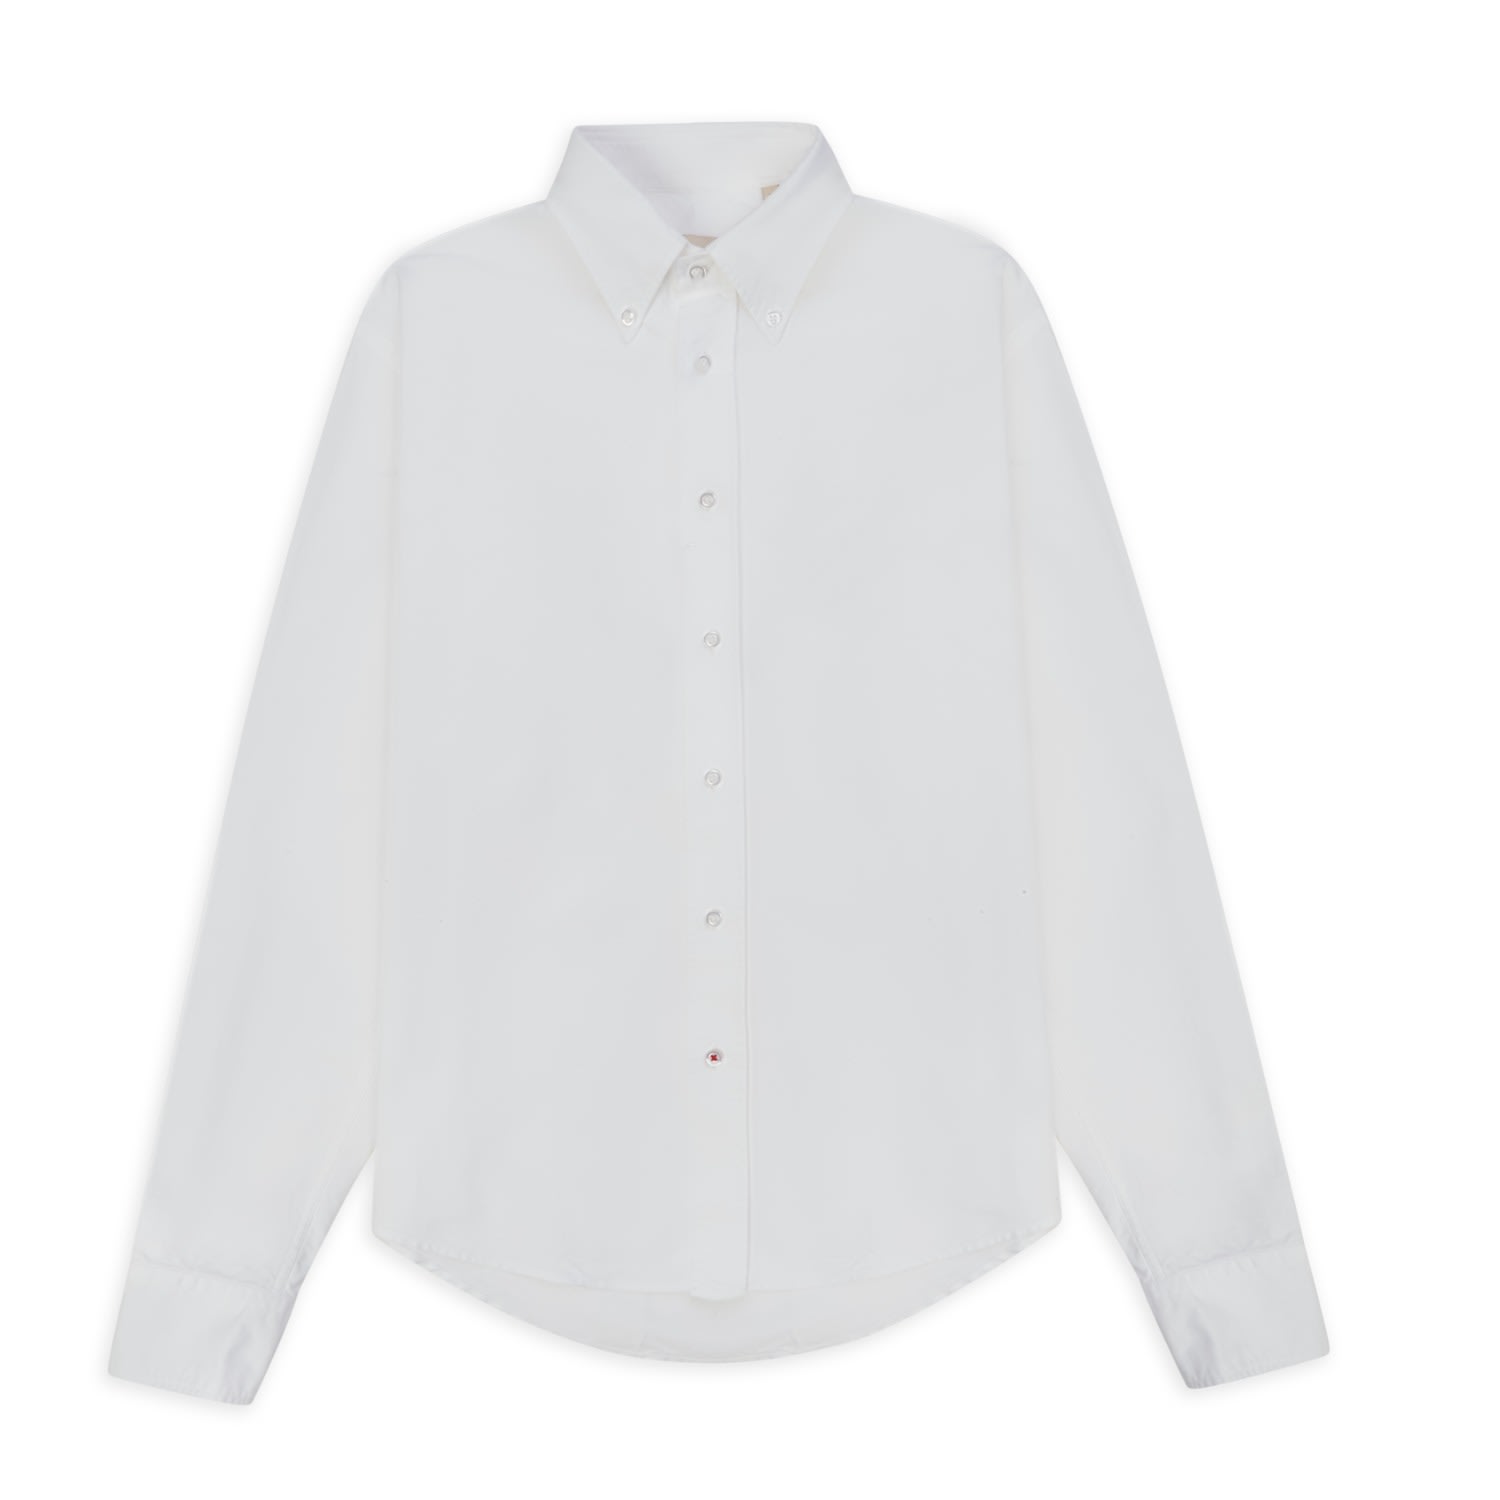 Burrows And Hare Men's Oxford Button-down Shirt - White